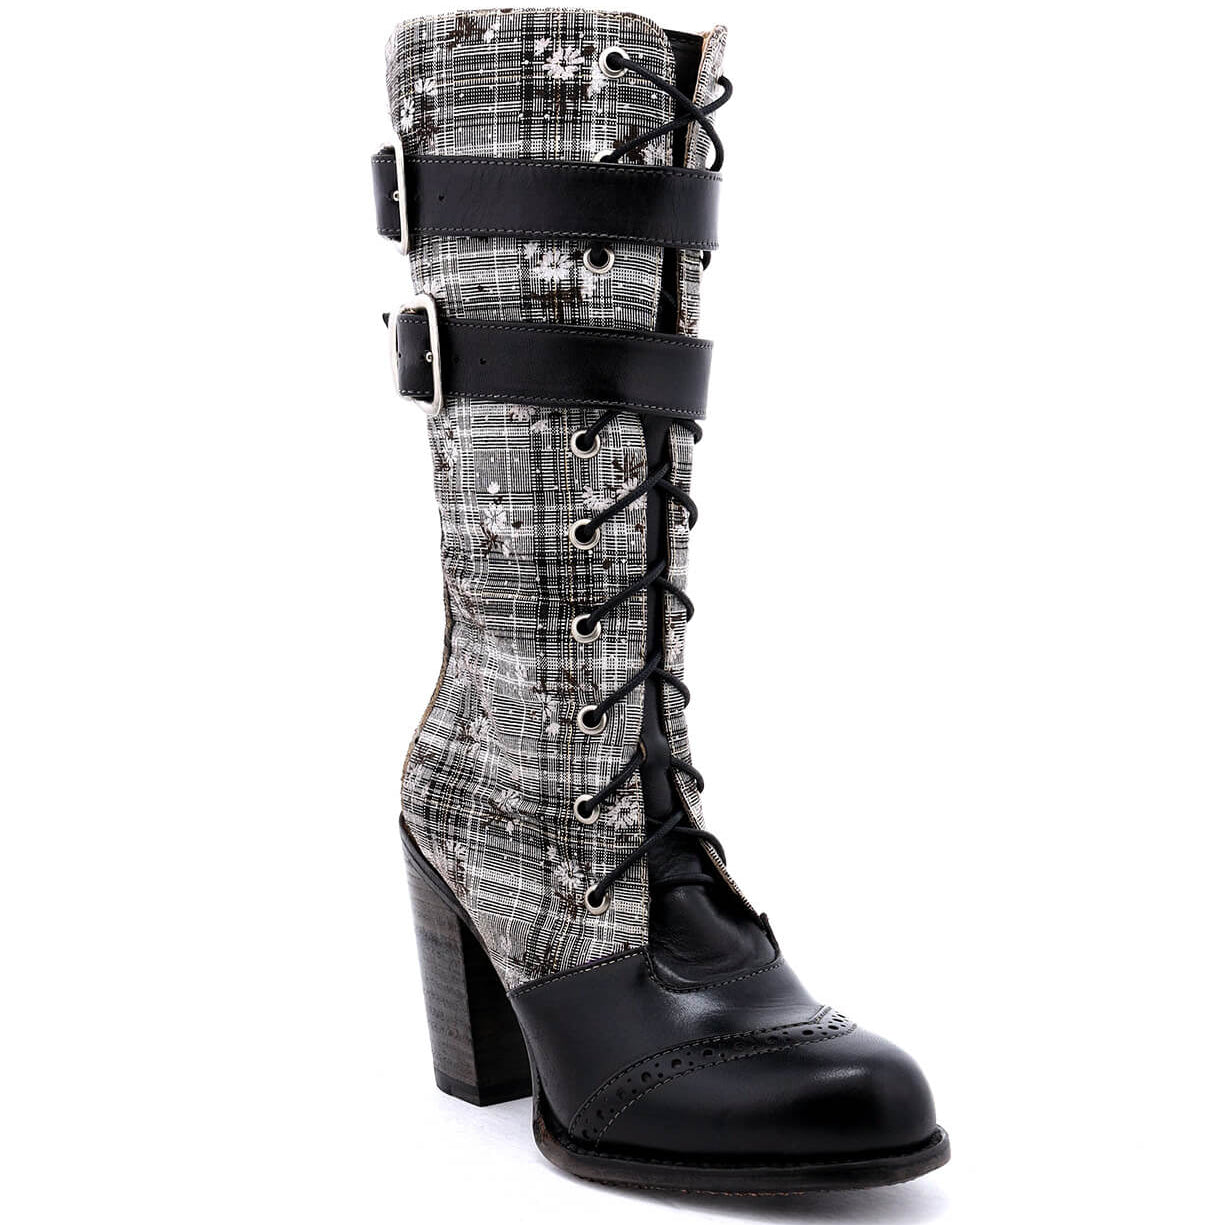 A whimsical print women's Arabella black and grey plaid boot with buckles from Oak Tree Farms.